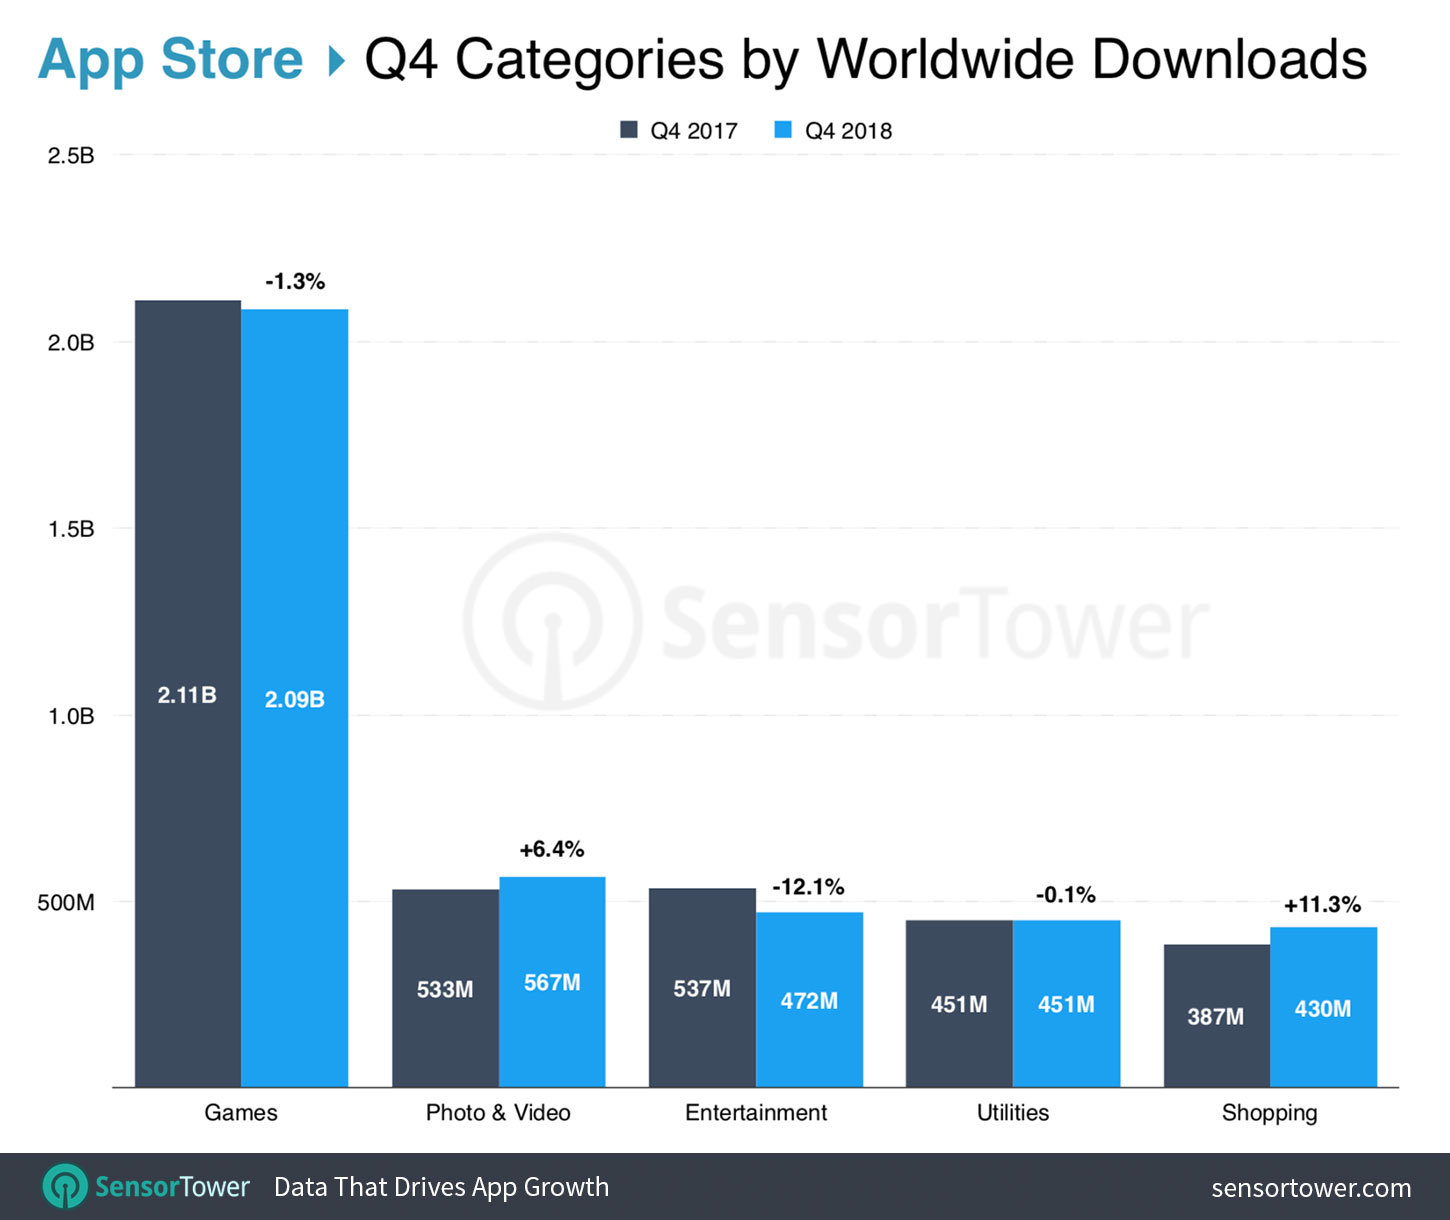 Top App Store Categories Worldwide for Q4 2018